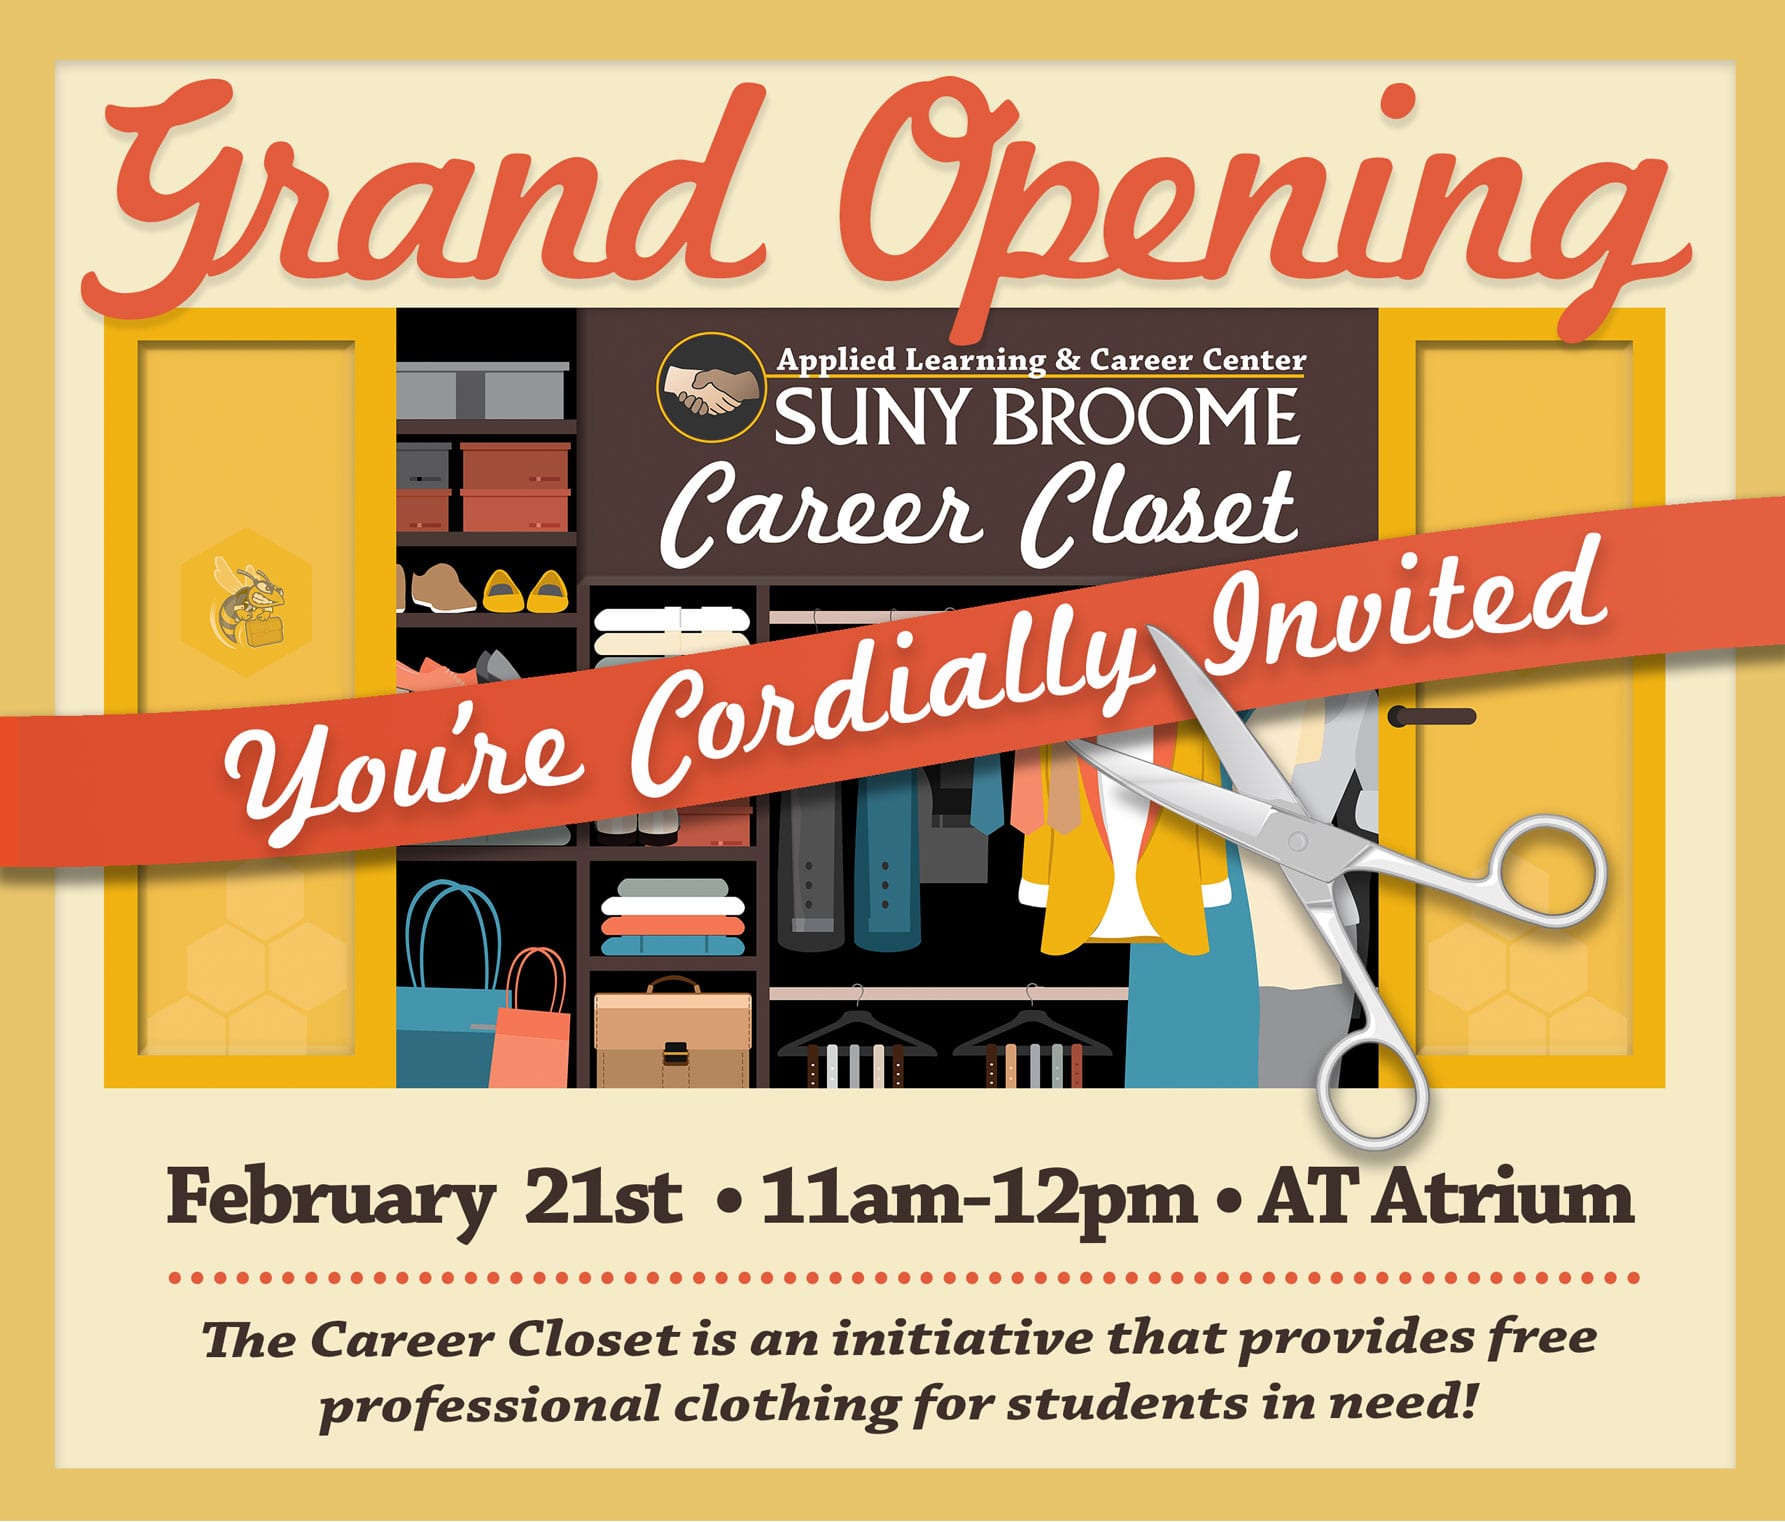 Join us: Grand opening of the SUNY Broome Career Closet on Feb. 21